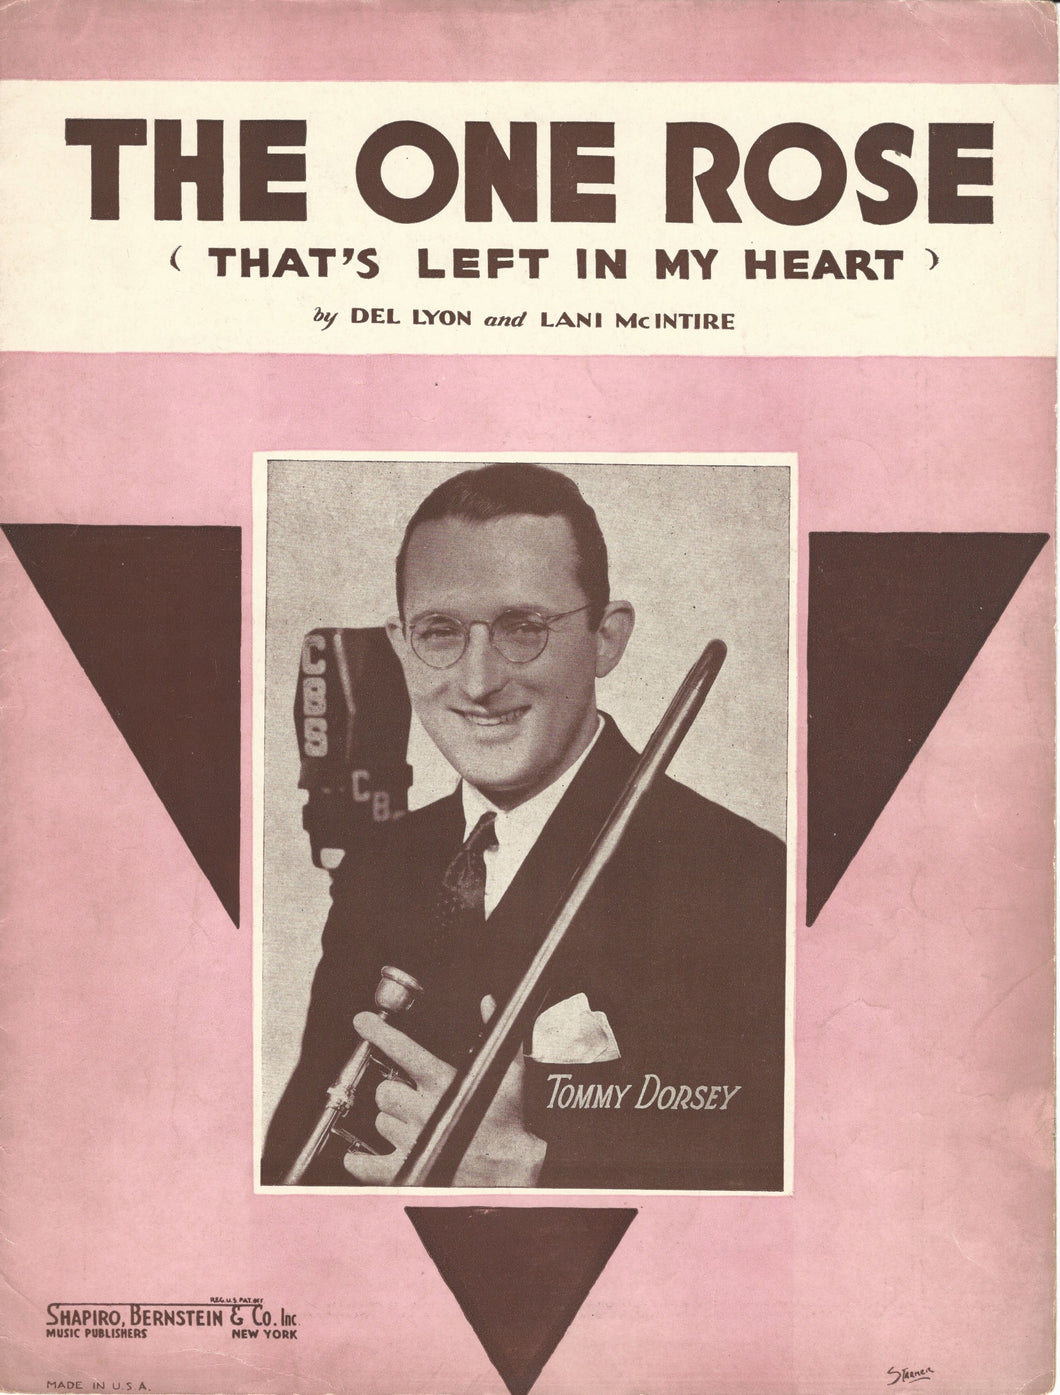 The One Rose (That's Left in My Heart), words & music by Del Lyon and Lani McIntire, 1936, Sheet Music